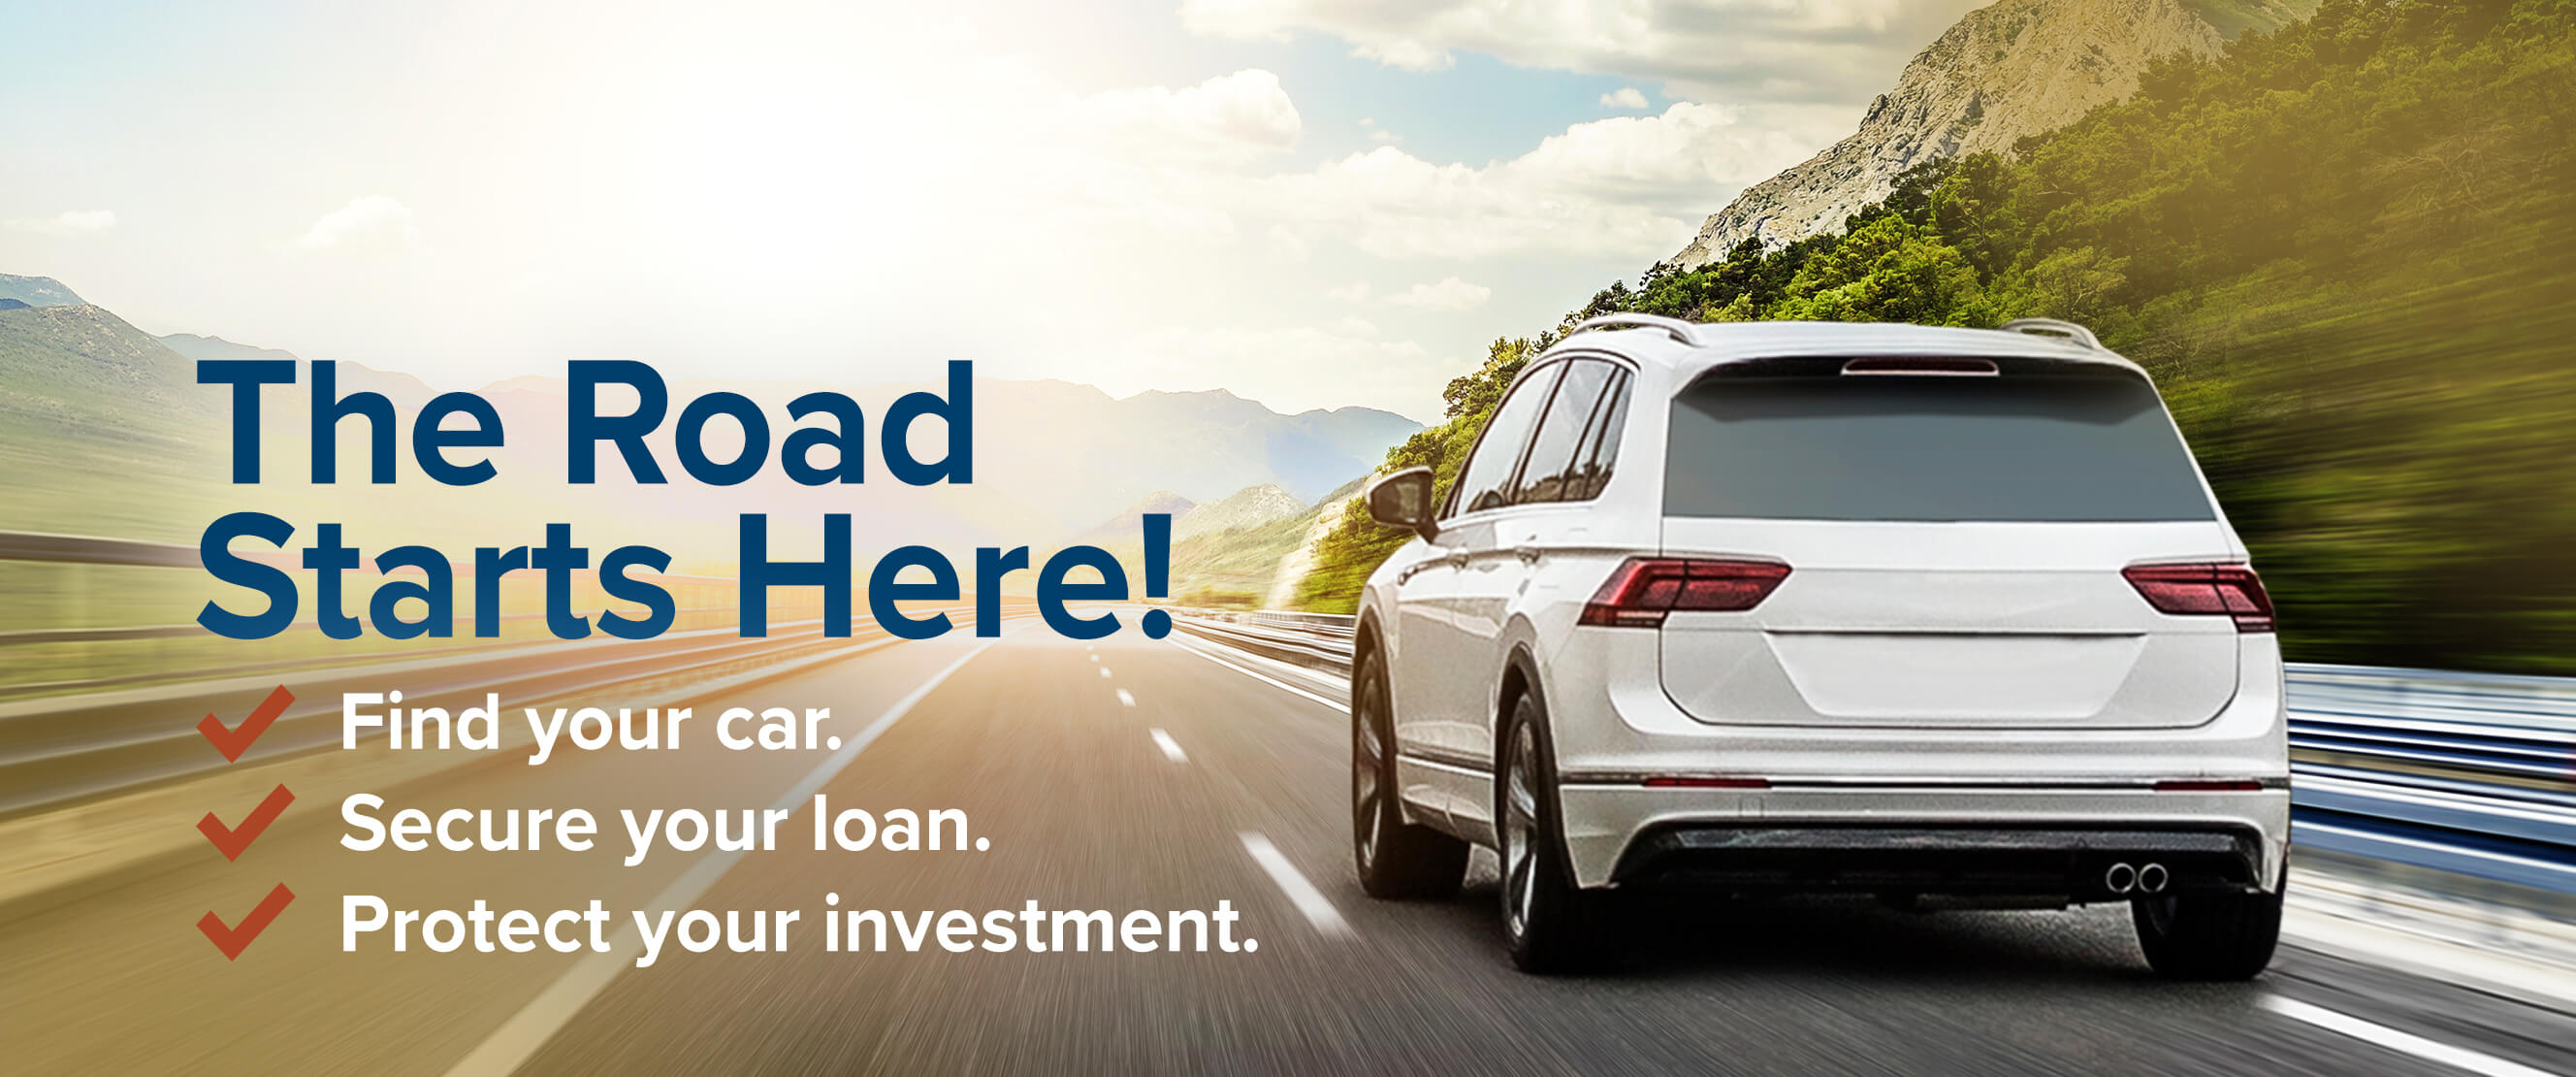 The Road Starts Here! Find your car. Secure your loan. Protect your investment.